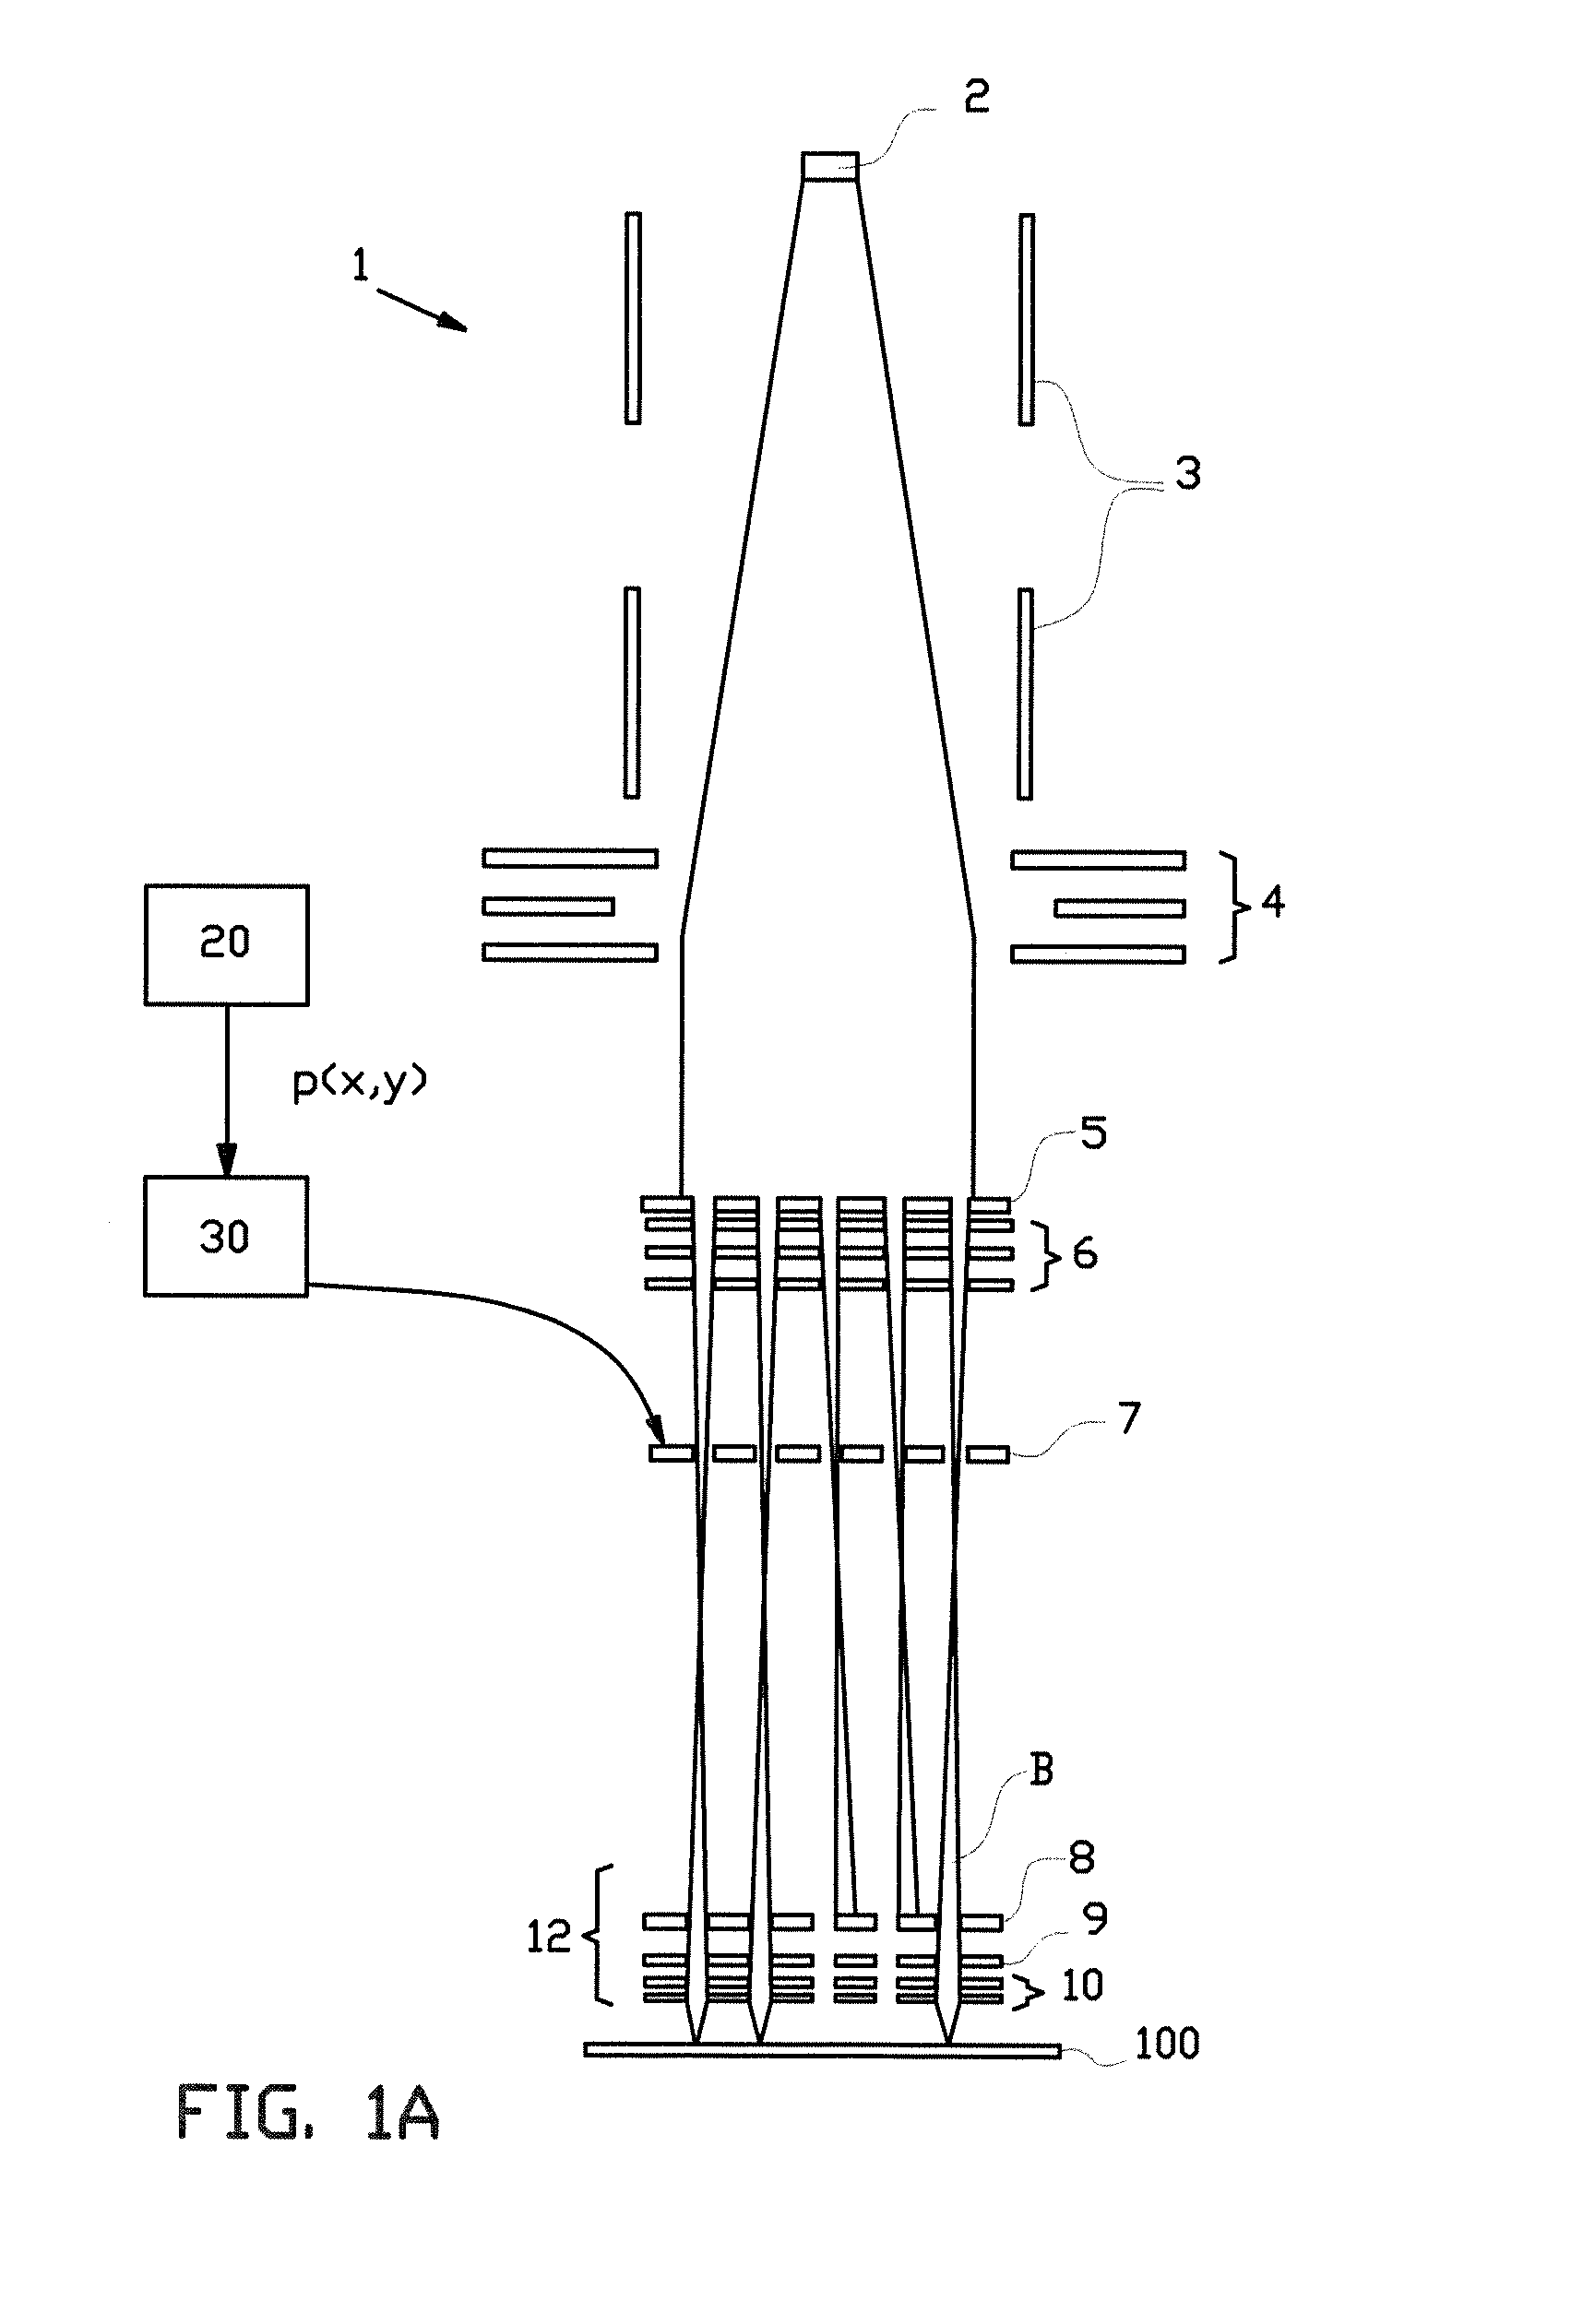 Proximity effect correction in a charged particle lithography system